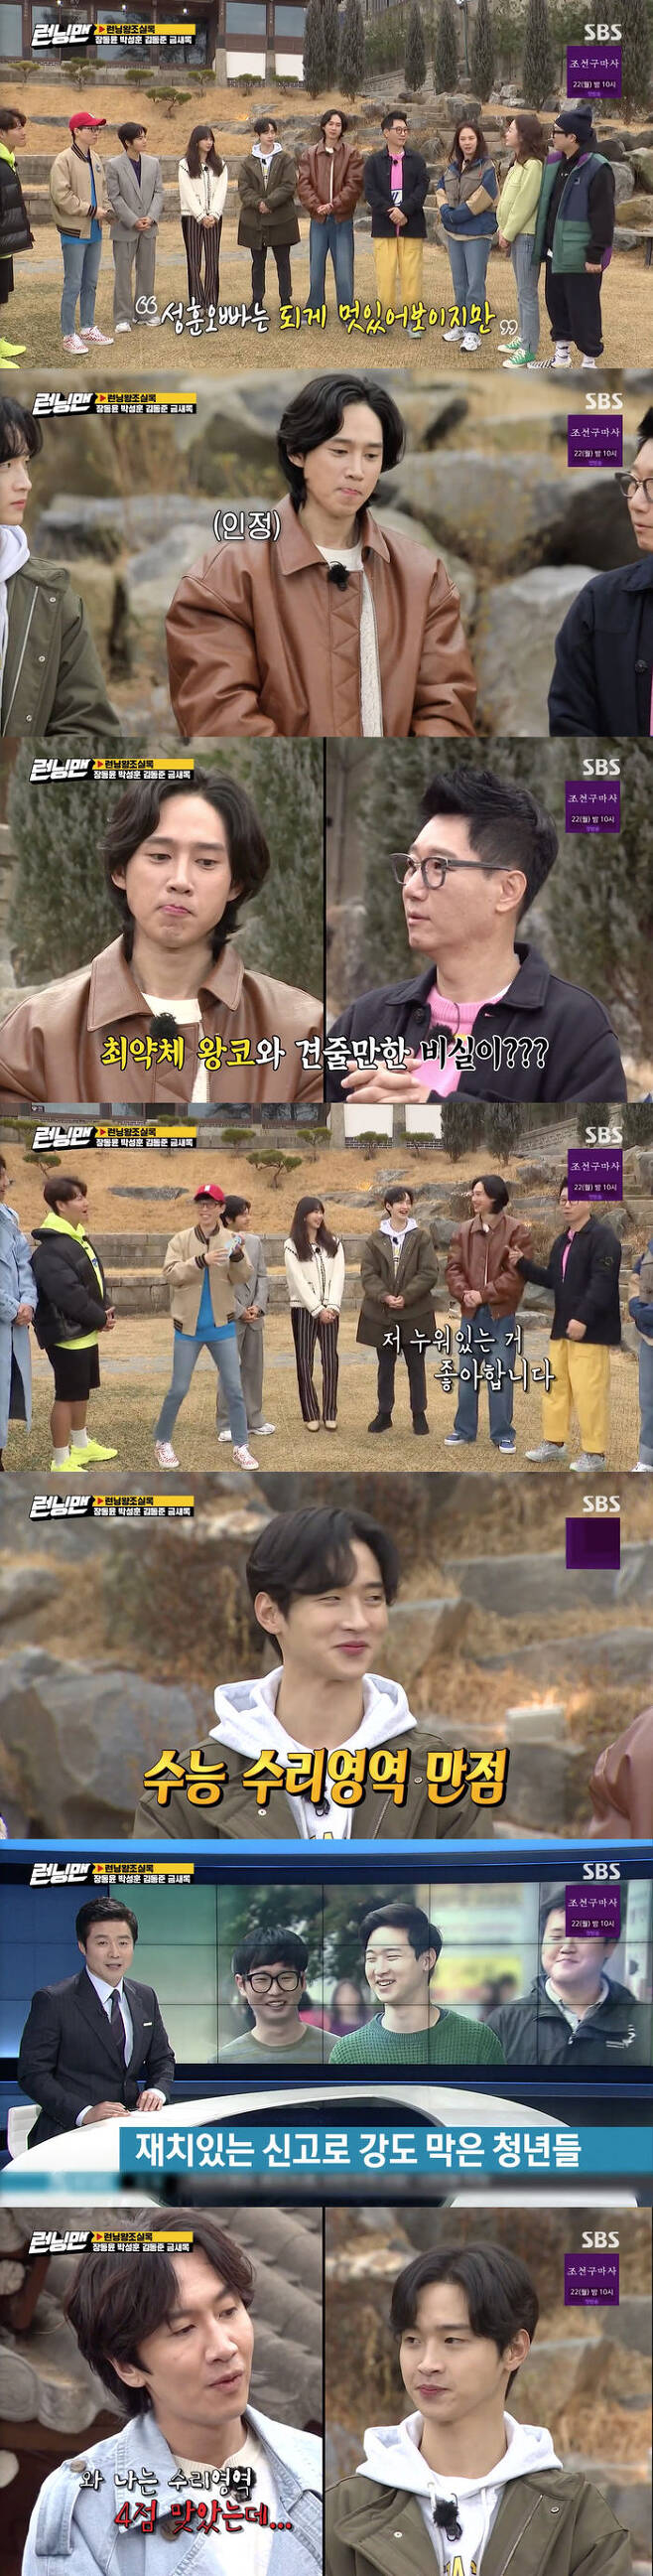 Jeon So-min reveals Park Sung-hoons vanityOn SBS Running Man broadcasted on the 14th, SBS New Moon drama Chosun Gummasa and Running Dynasty Annals Race were performed.On the day of the broadcast, Park Sung-hoon was attracted by the fact that he was a close friend of Jeon So-min.I played a one-act drama in 2018, said Jeon So-min. My brother looks cool, but he is actually very weak. My brother may win.The members then asked Park Sang Hoon if he did not do Exercise.Park Sang Hoon said, Yes, I do not do it at all. So the members expected that the second Kim Hee Won would come out.Park Sang Hoon also laughed at the fact that he liked to lie down as a hobby.Ji Seok-jin touched Park Sung-hoons forearm and laughed, saying, I was so surprised that I was so thin.Jang Dong-yoon then revealed his unique history of perfecting the area of repairing the CSAT, and also impressed by the release of the video that appeared in the news when he was in college.Lee Kwang-soo envied, saying, I was four points in the repair area. Kim Jong-guk said, Is not it better to study?Yoo Jae-Suk then responded, Then youd rather have Exercise at that level?